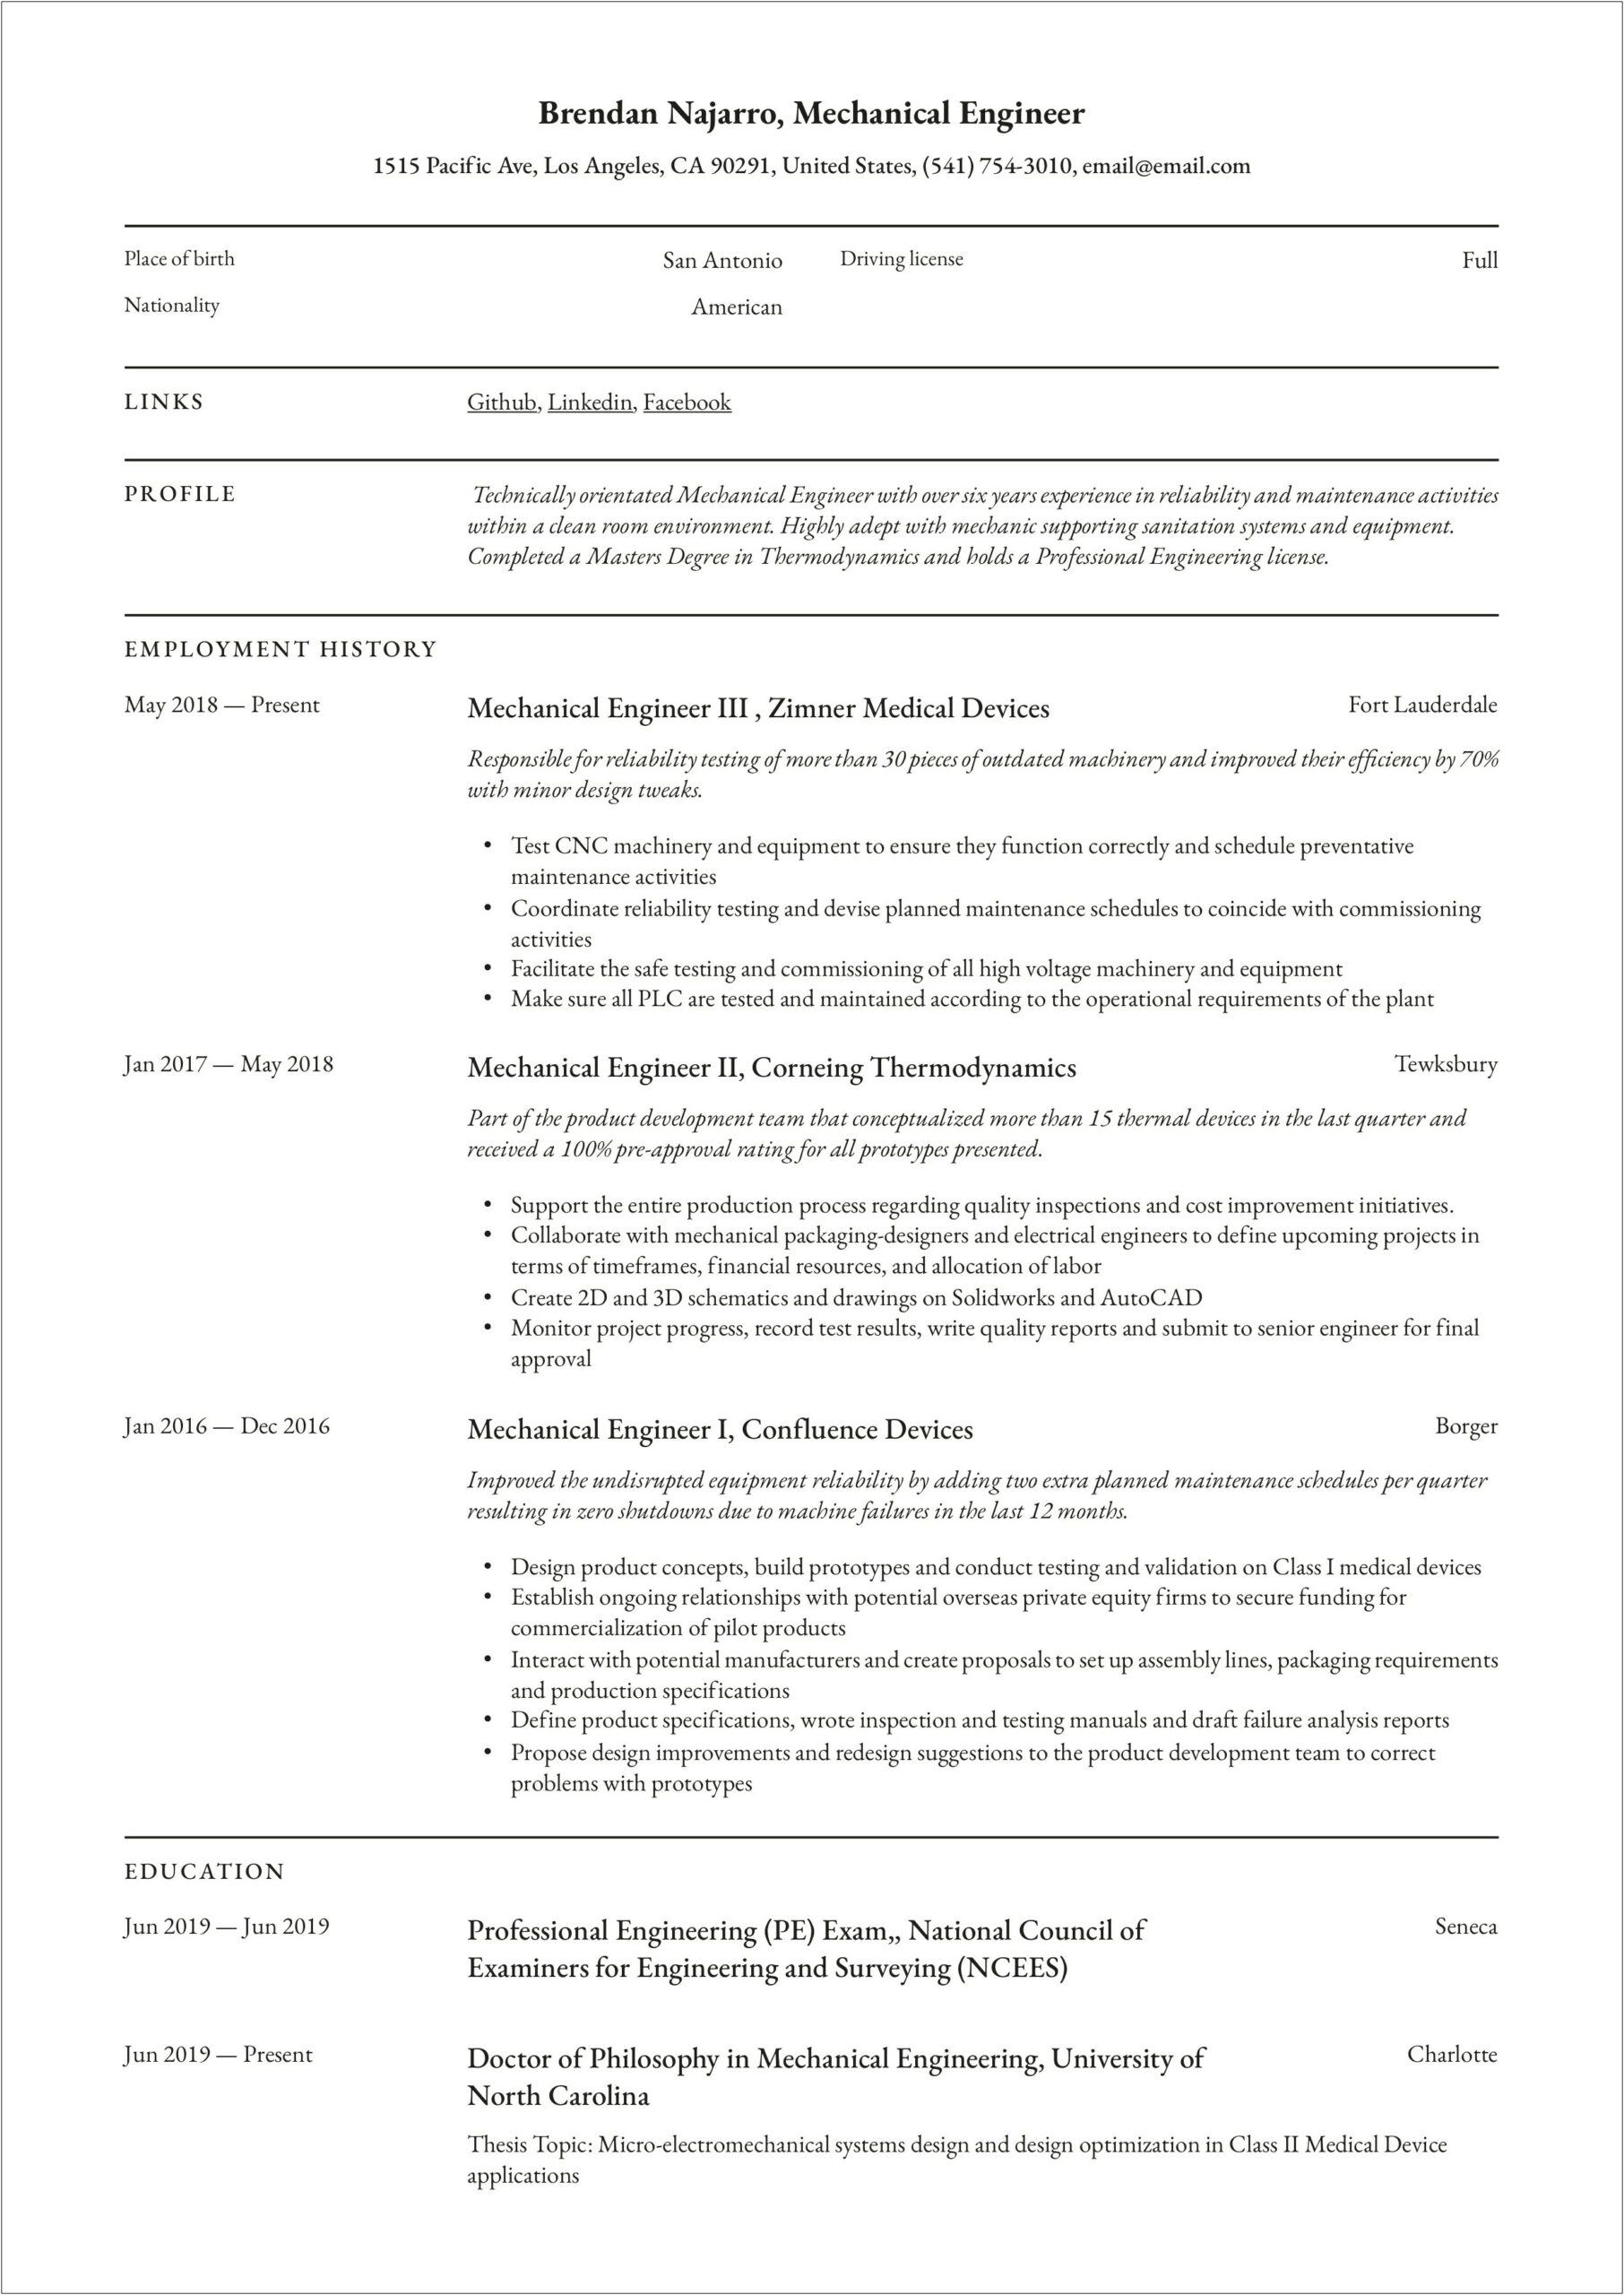 Sample Resume For Mechanical Production Engineer